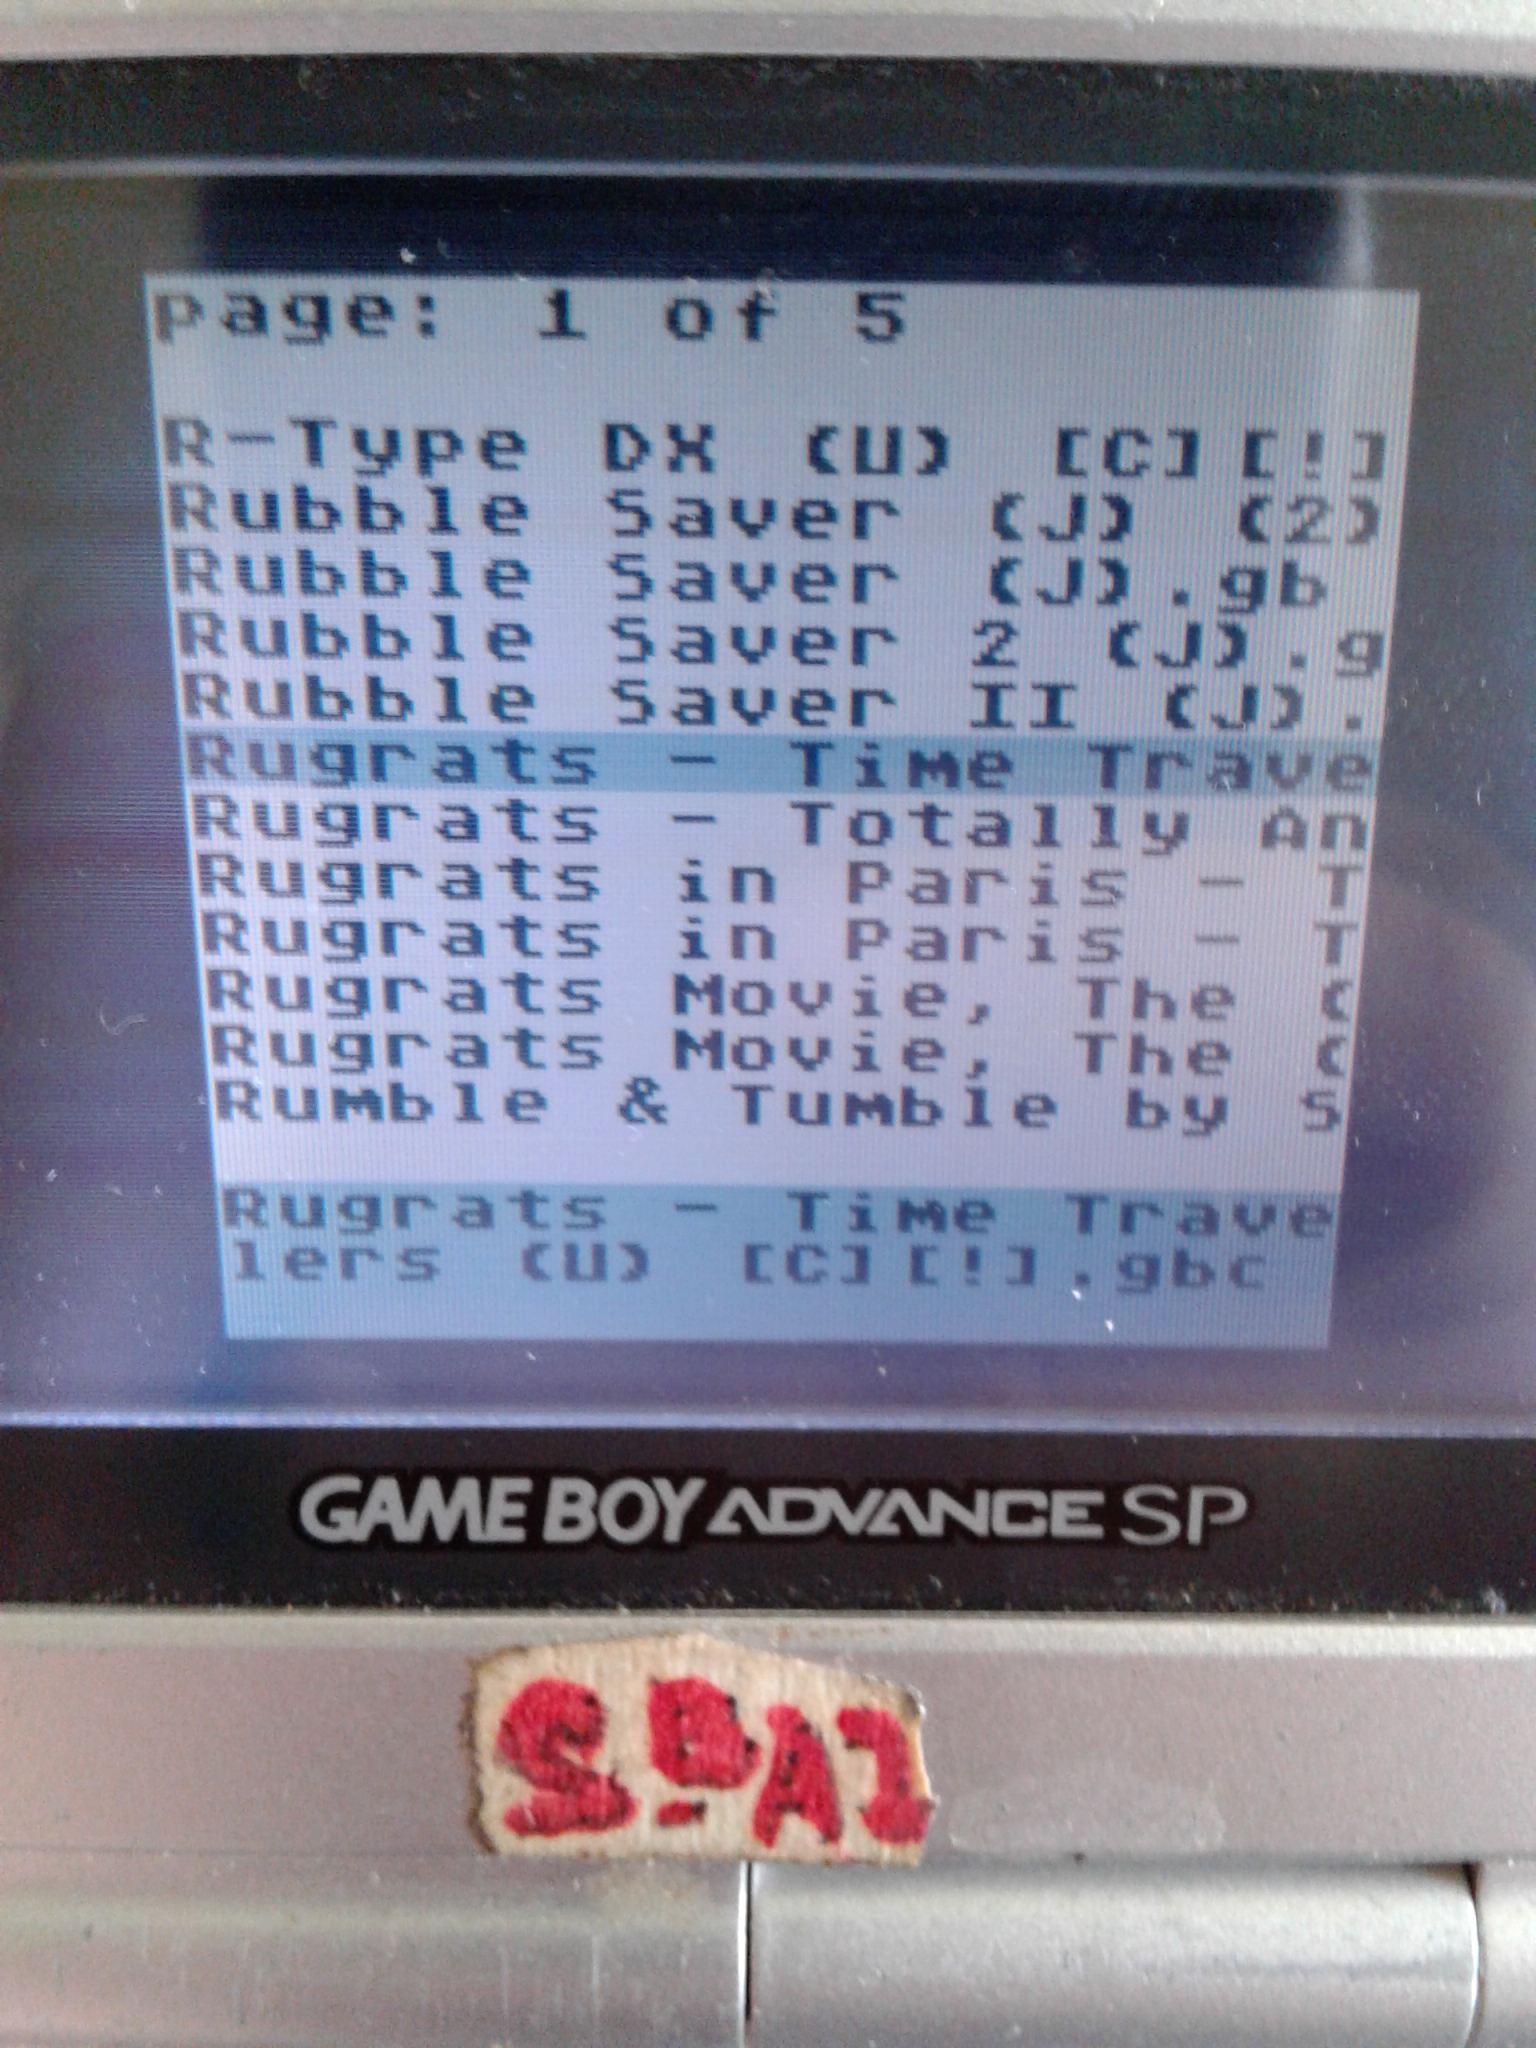 S.BAZ: Rugrats: Time Travelers (Game Boy Color) 3,400 points on 2019-11-21 03:22:13